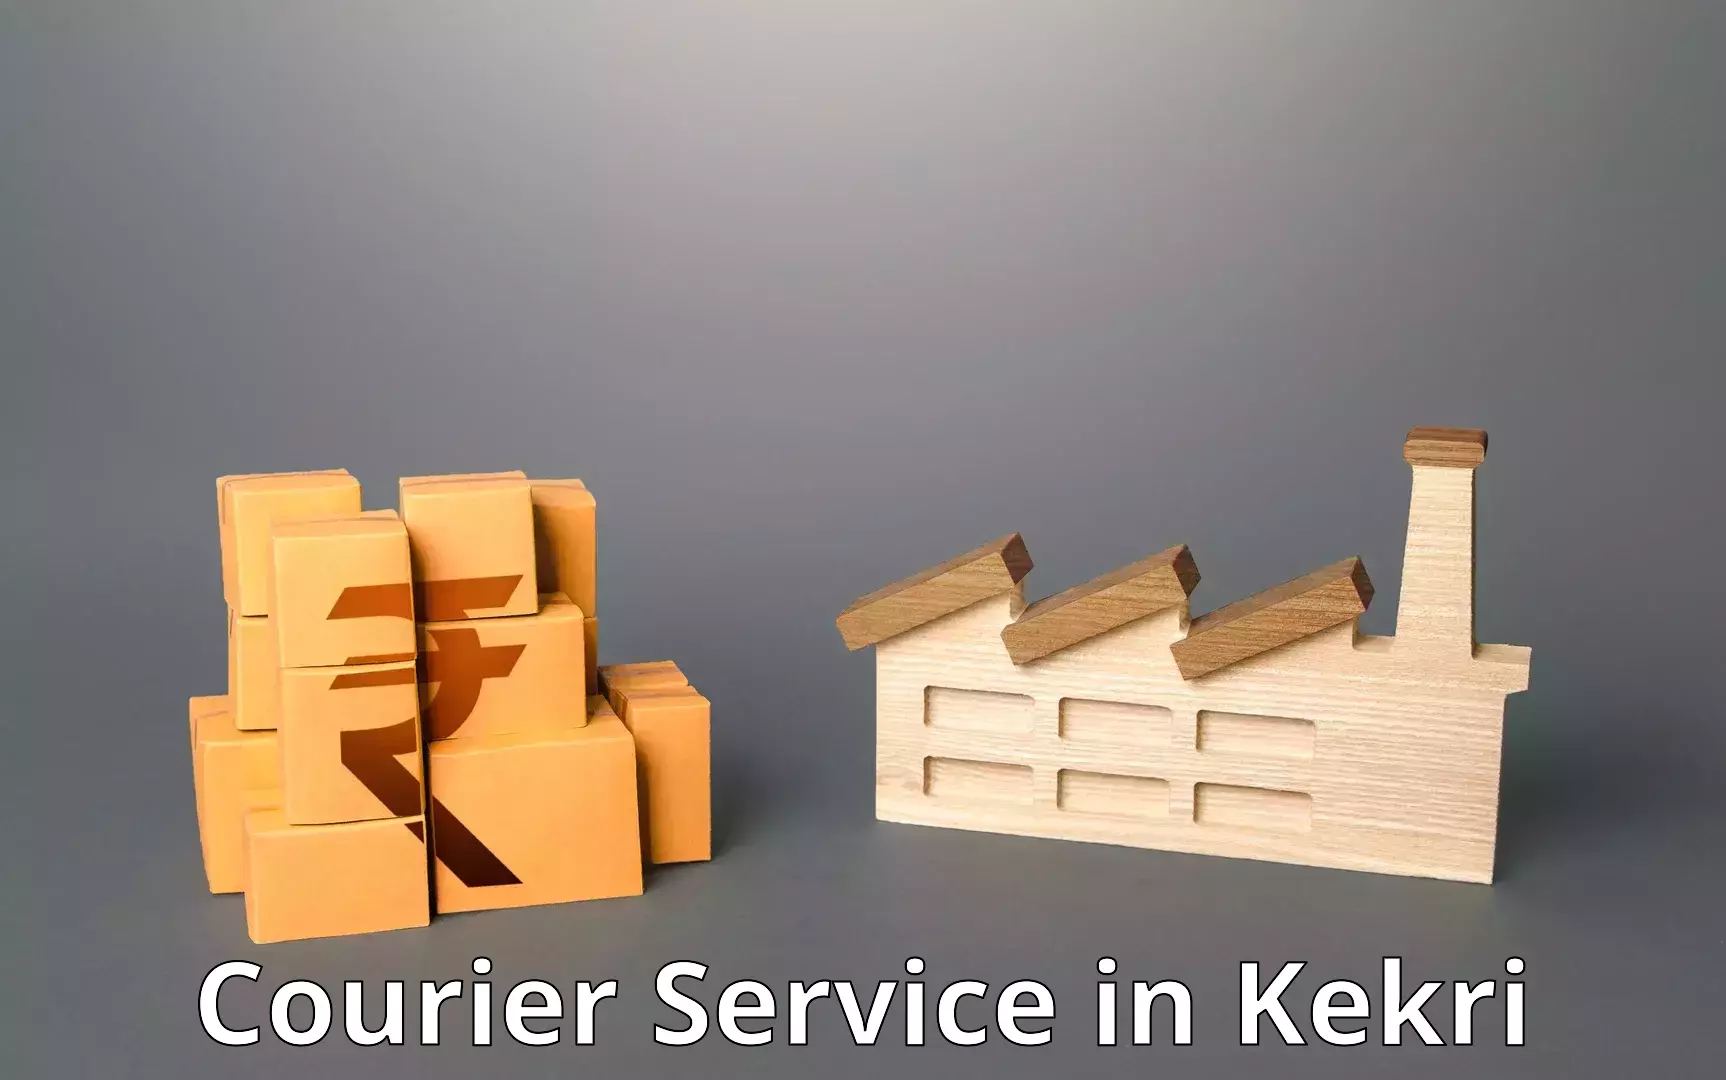 Secure package delivery in Kekri